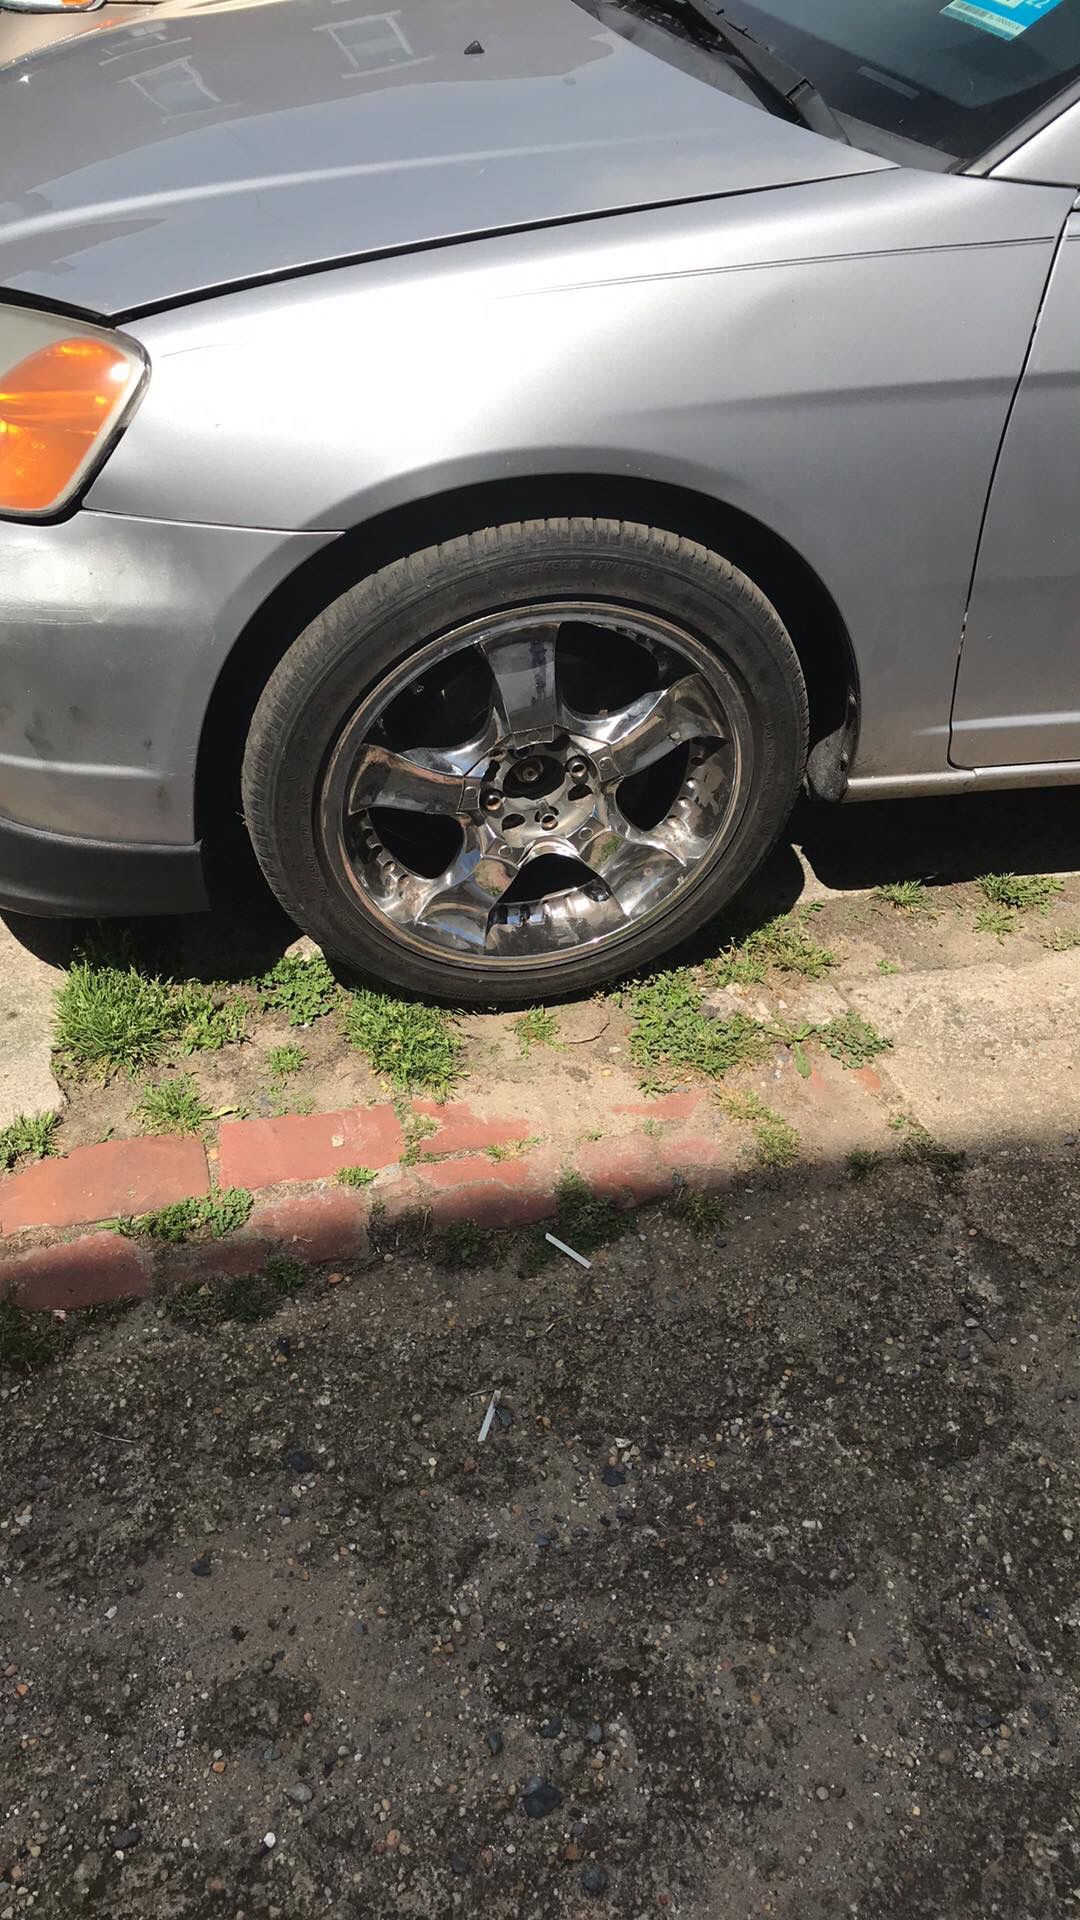 4 lugs 17” rim $150 Price is firm